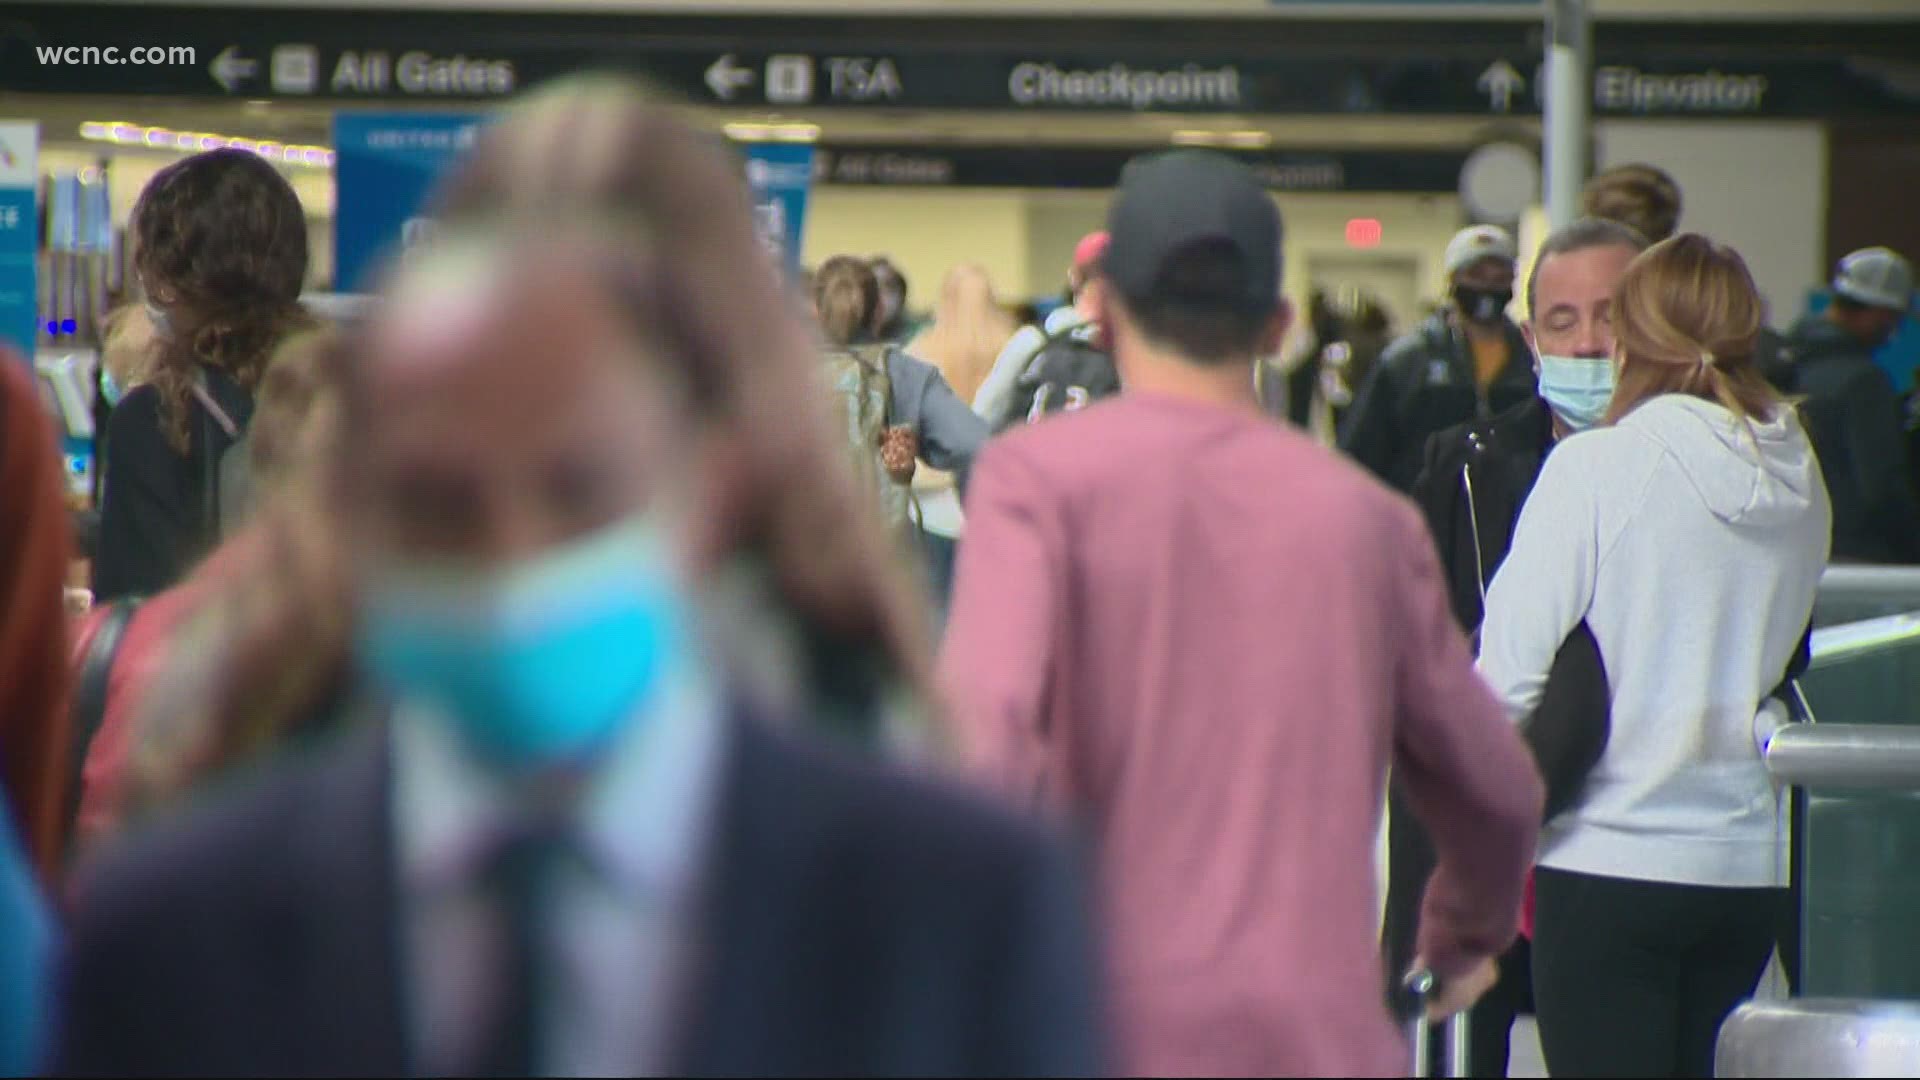 On Sunday, travelers continued to arrive for departures even as North Carolina reported a record high of 4,514 new coronavirus cases in a single day.